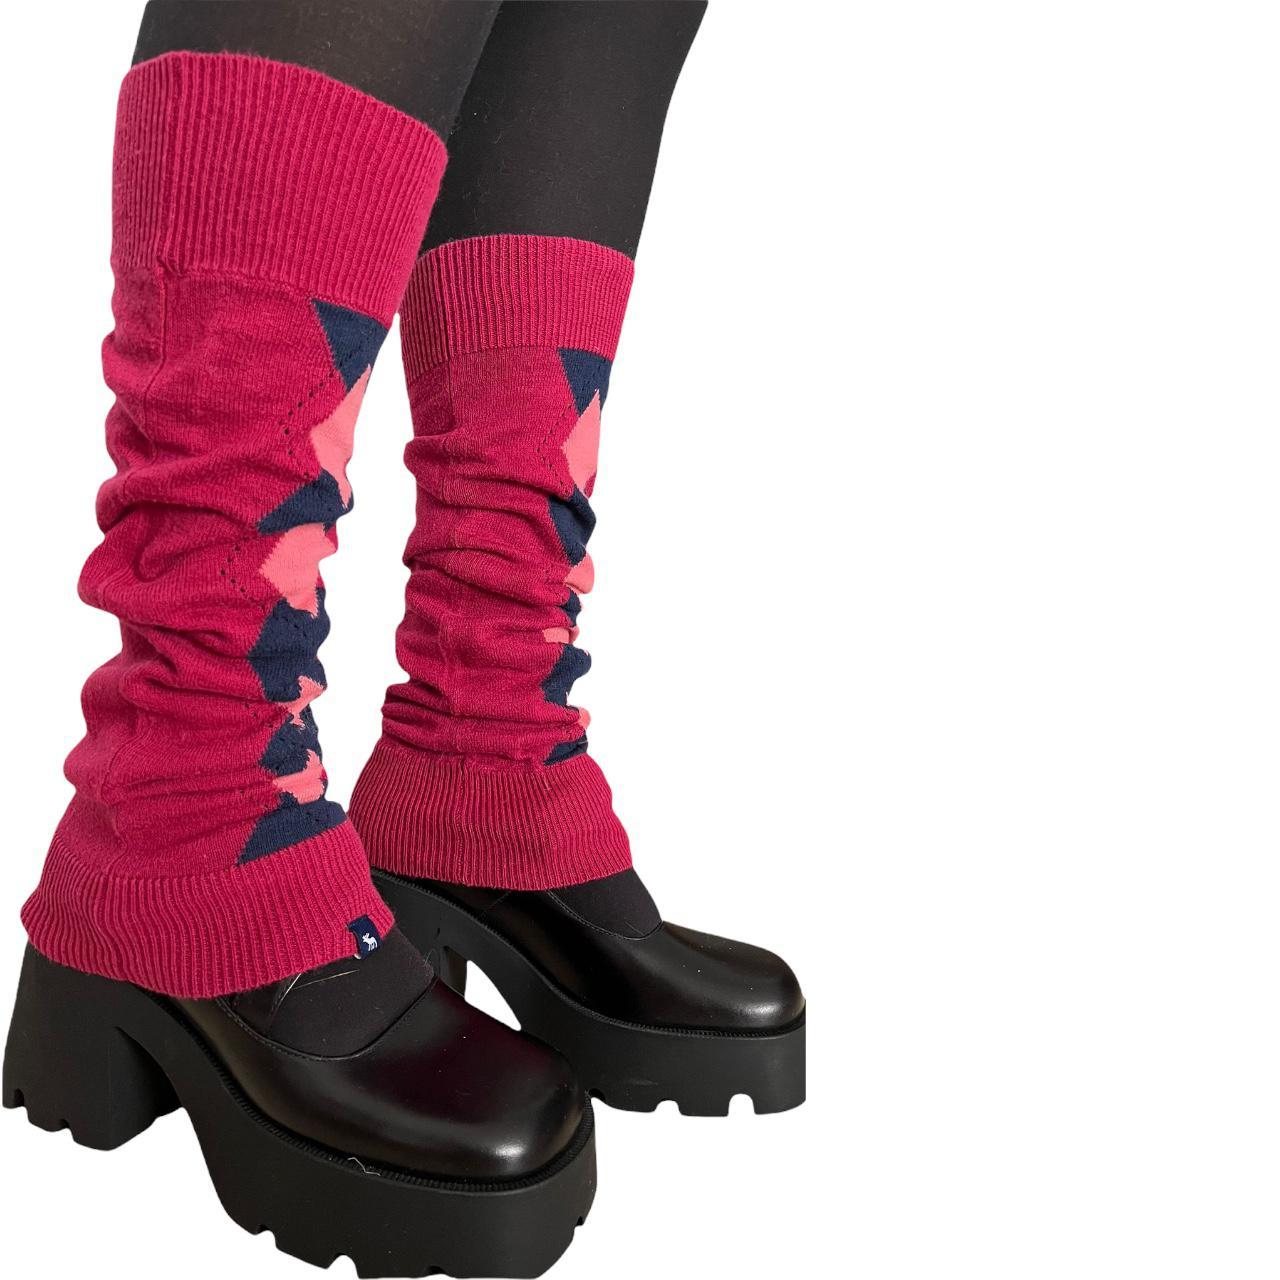 Product Image 2 - Abercrombie and Fitch leg warmers
Dark